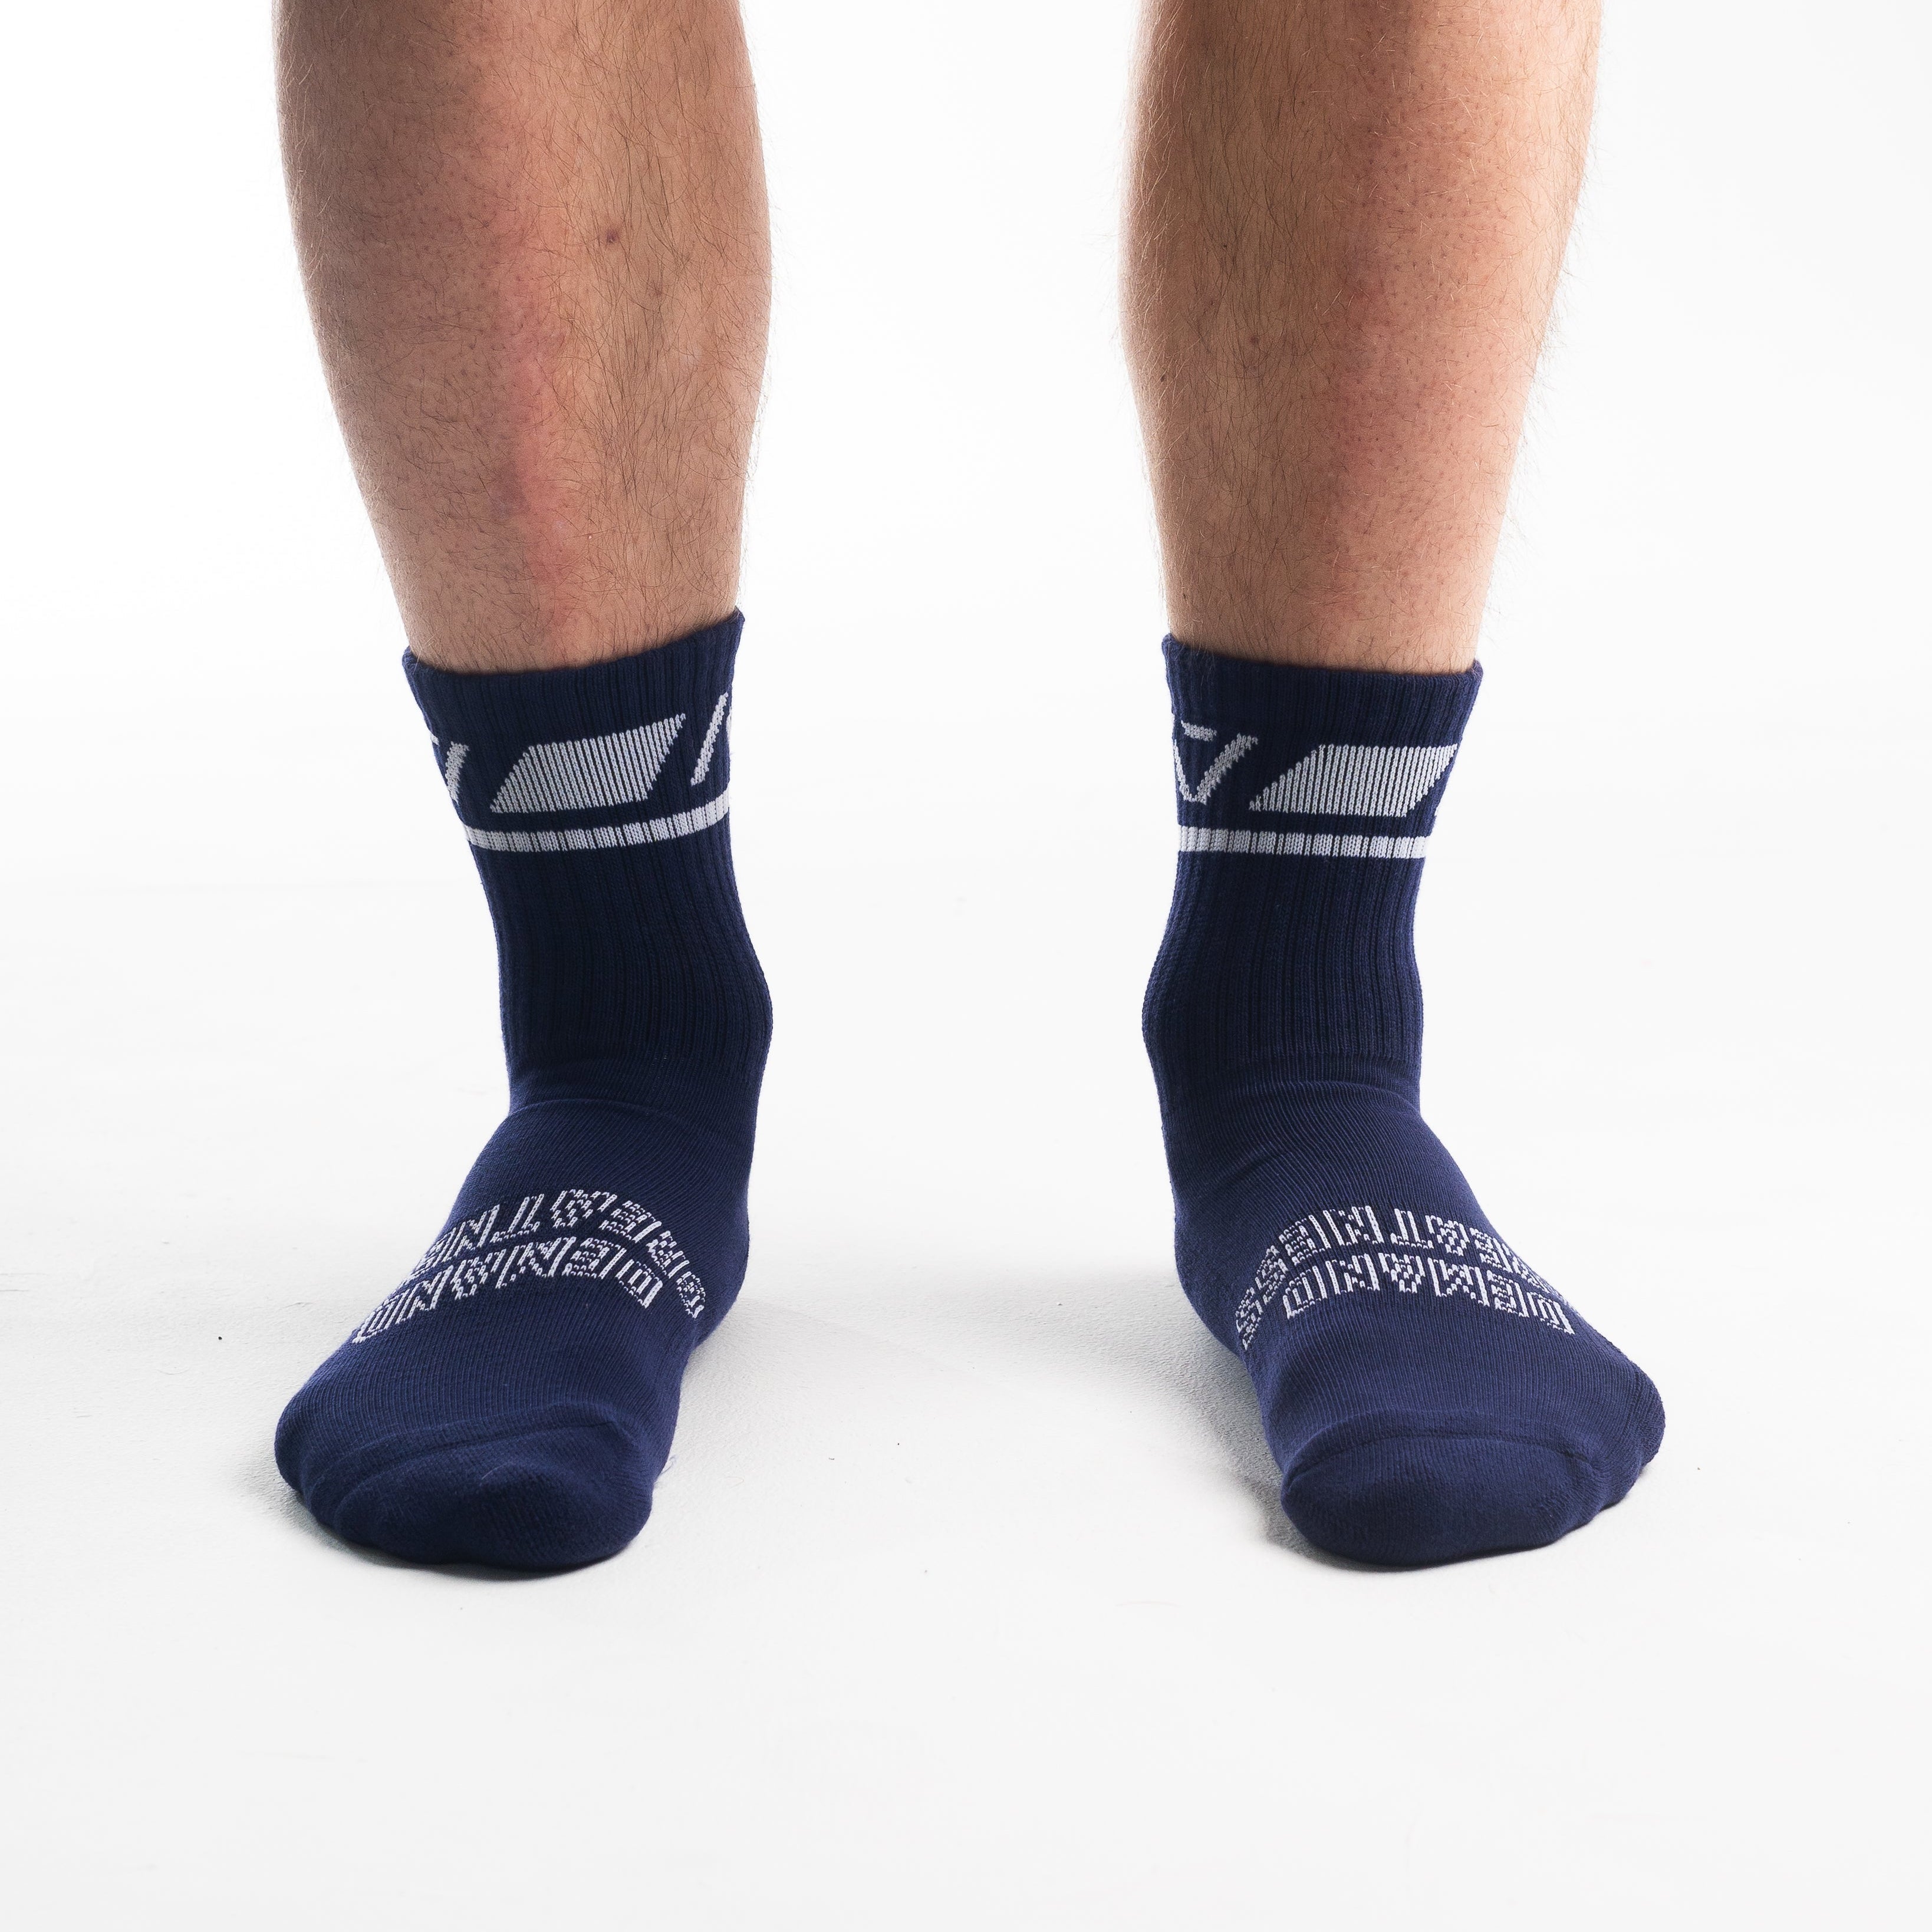 A7 Night Light Crew socks showcase white and blue logos to let your energy show on the platform, in your training or while out and about. The IPF Approved Shadow Stone Meet Kit includes Powerlifting Singlet, A7 Meet Shirt, A7 Zebra Wrist Wraps, A7 Deadlift Socks, Hourglass Knee Sleeves (Stiff Knee Sleeves and Rigor Mortis Knee Sleeves). Genouillères powerlifting shipping to France, Spain, Ireland, Germany, Italy, Sweden and EU.